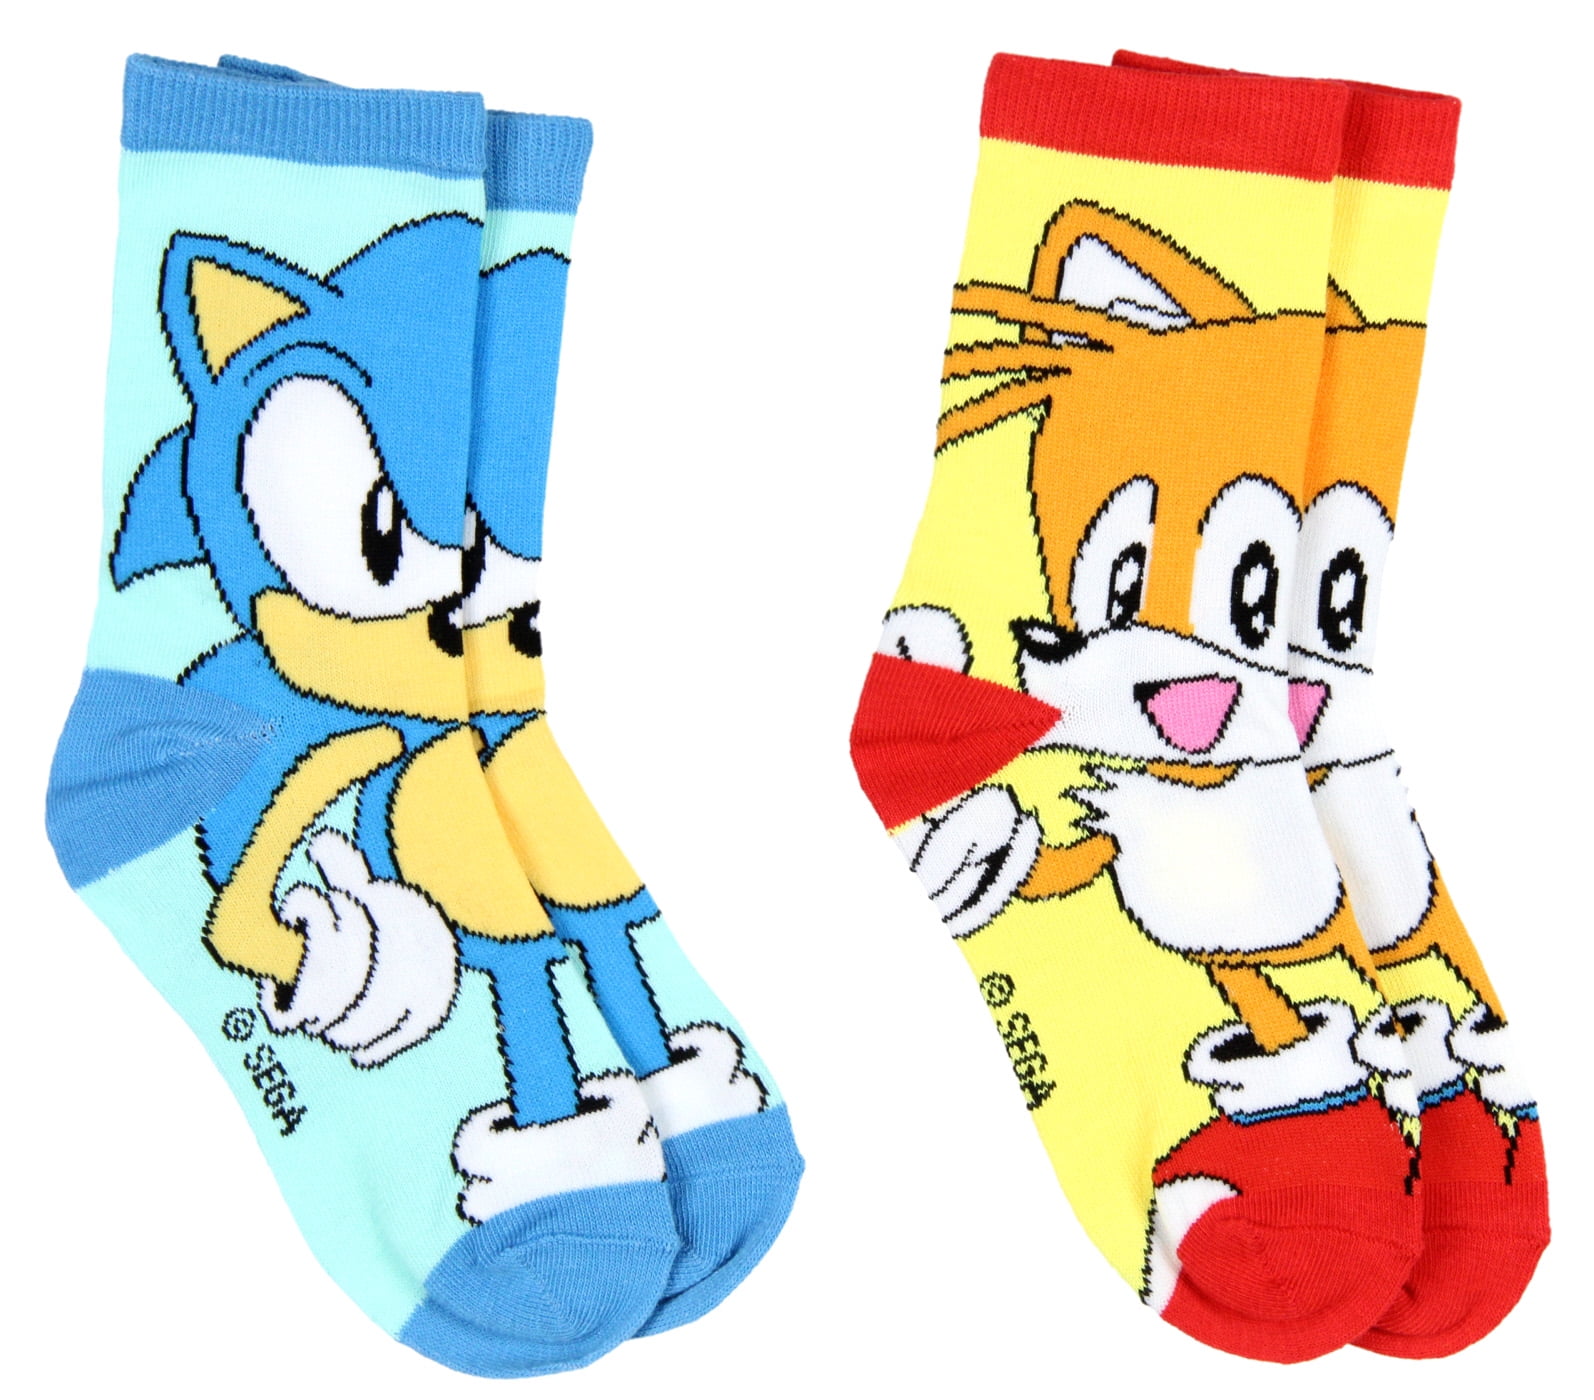 Sonic The Hedgeblog on X: Kids underwear released in the 90's